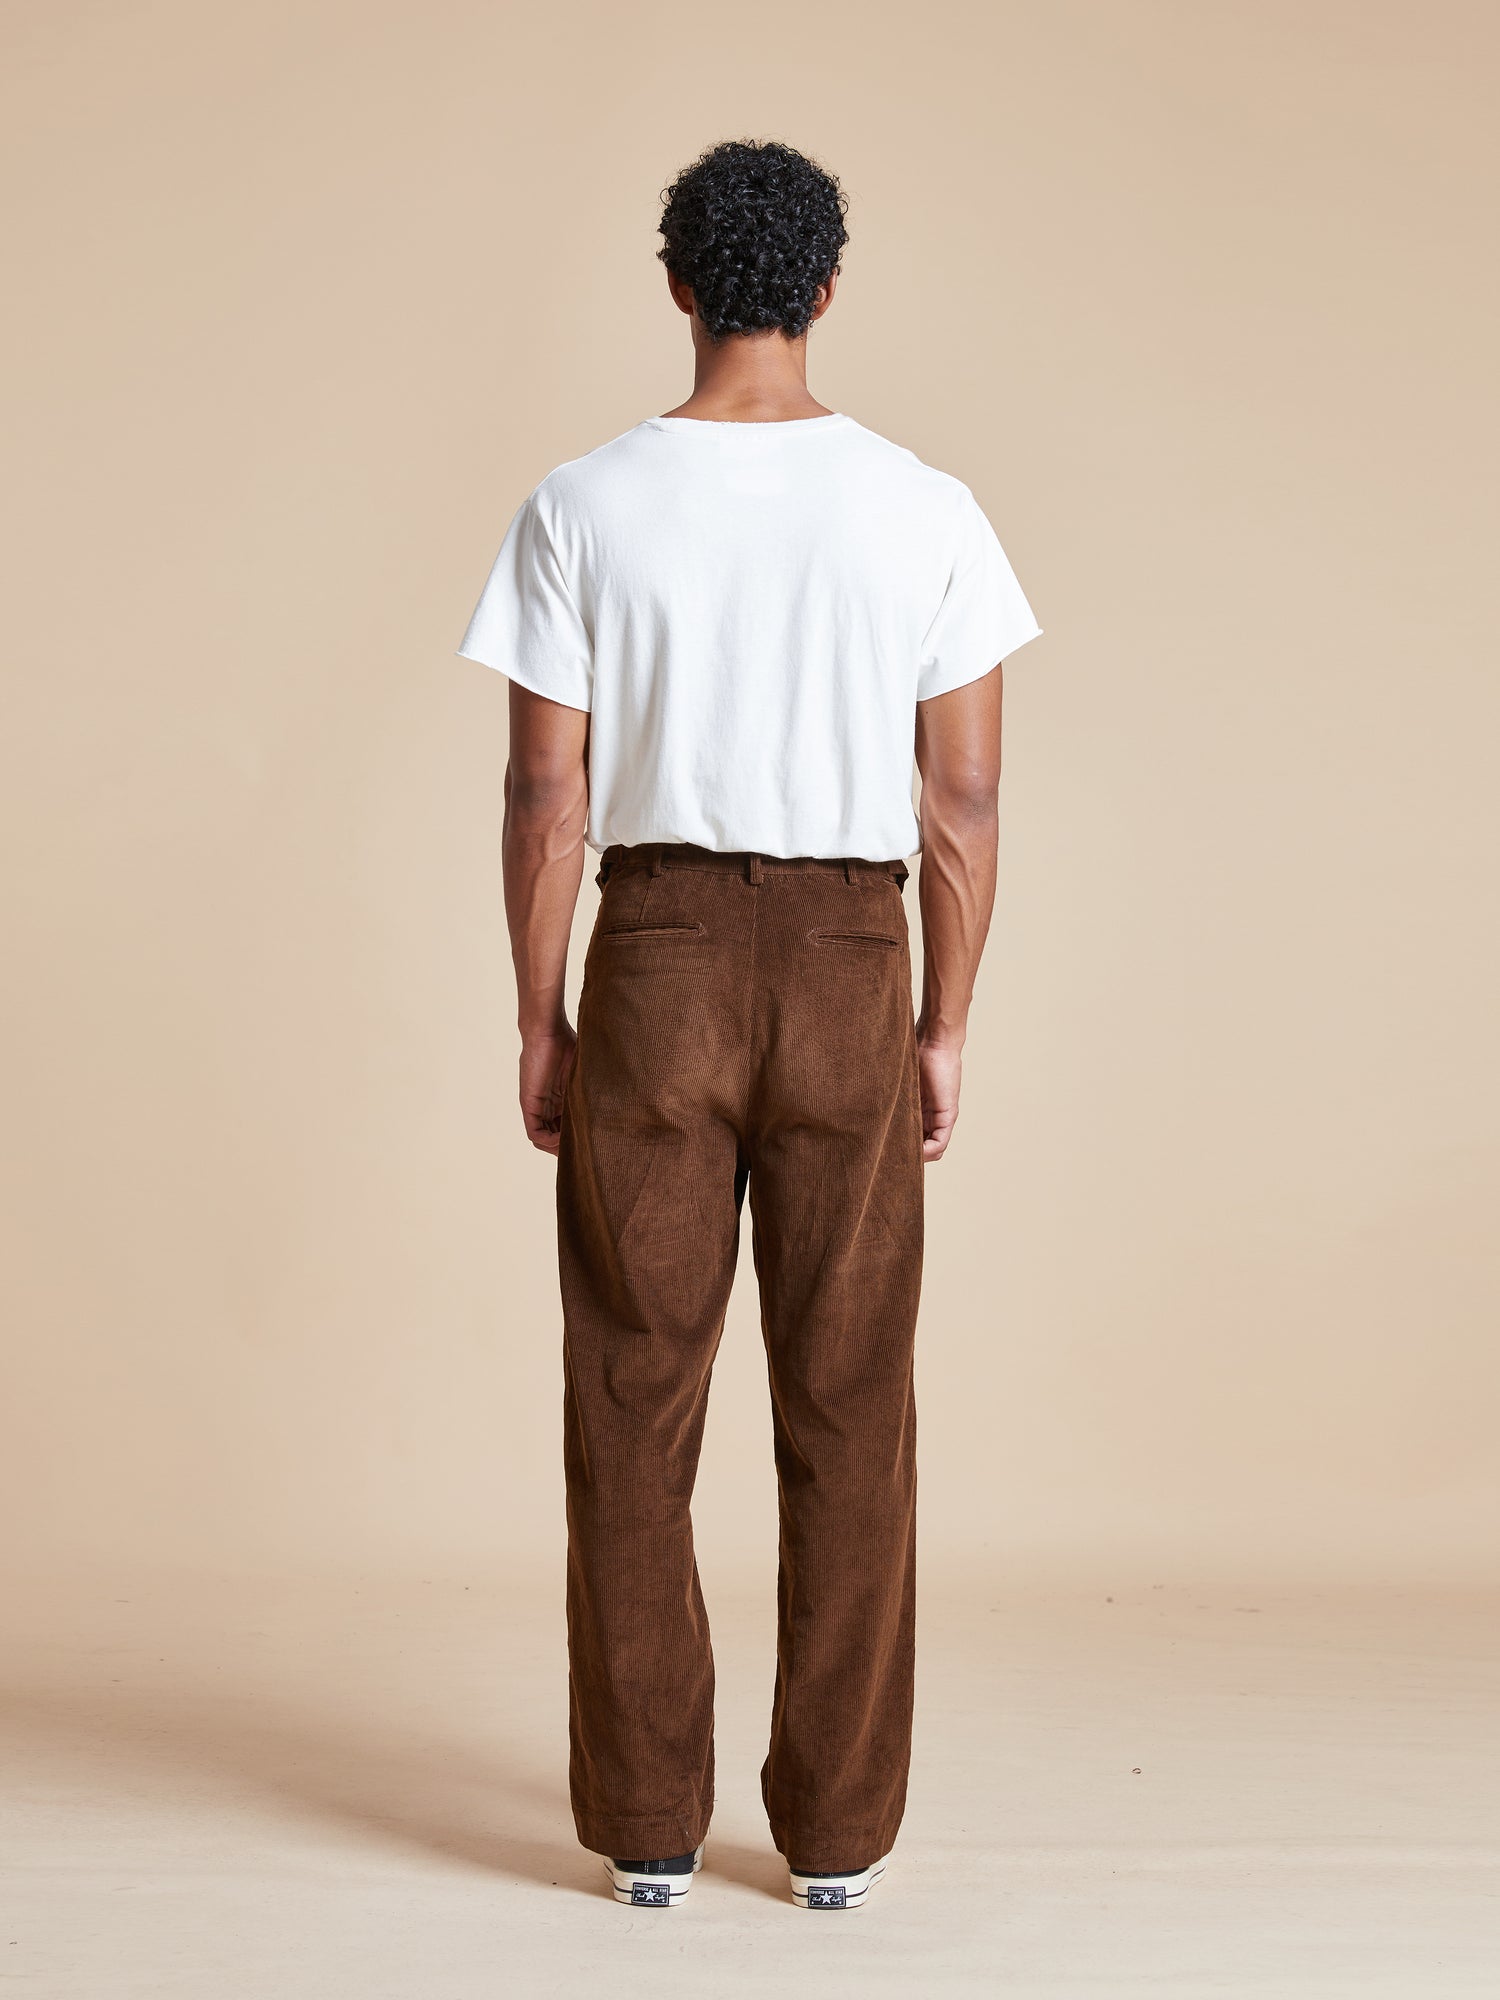 The back view of a man wearing Found Multi-Plaid Patch Corduroy Pants with fabric patches.